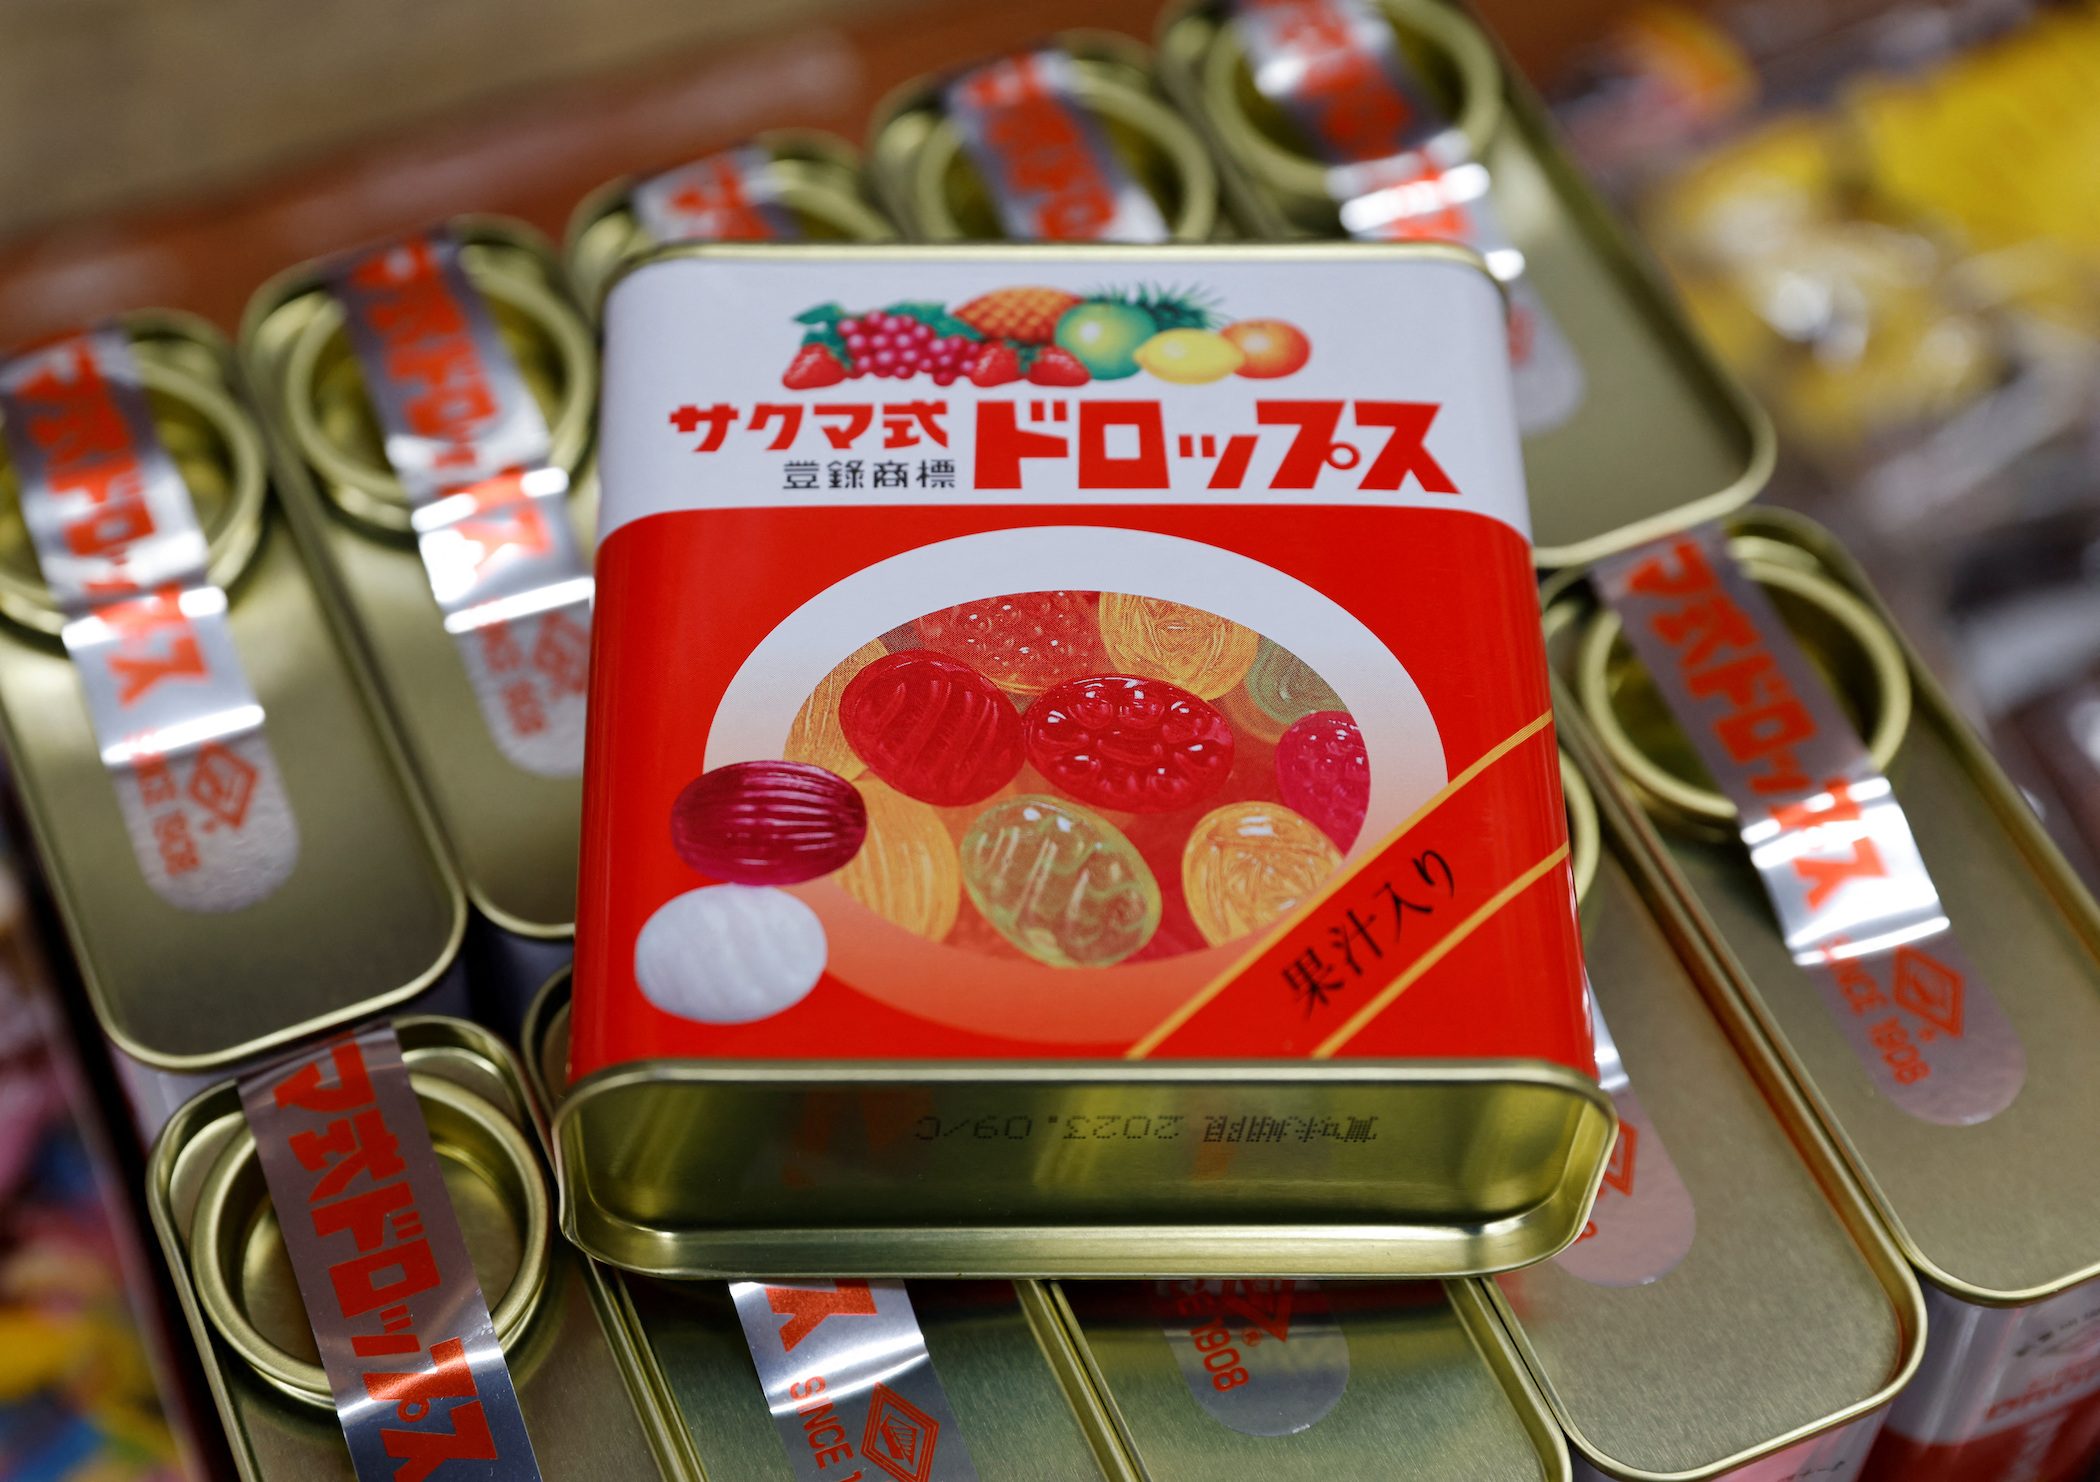 Inflation brings end to beloved 114-year-old Japanese candy